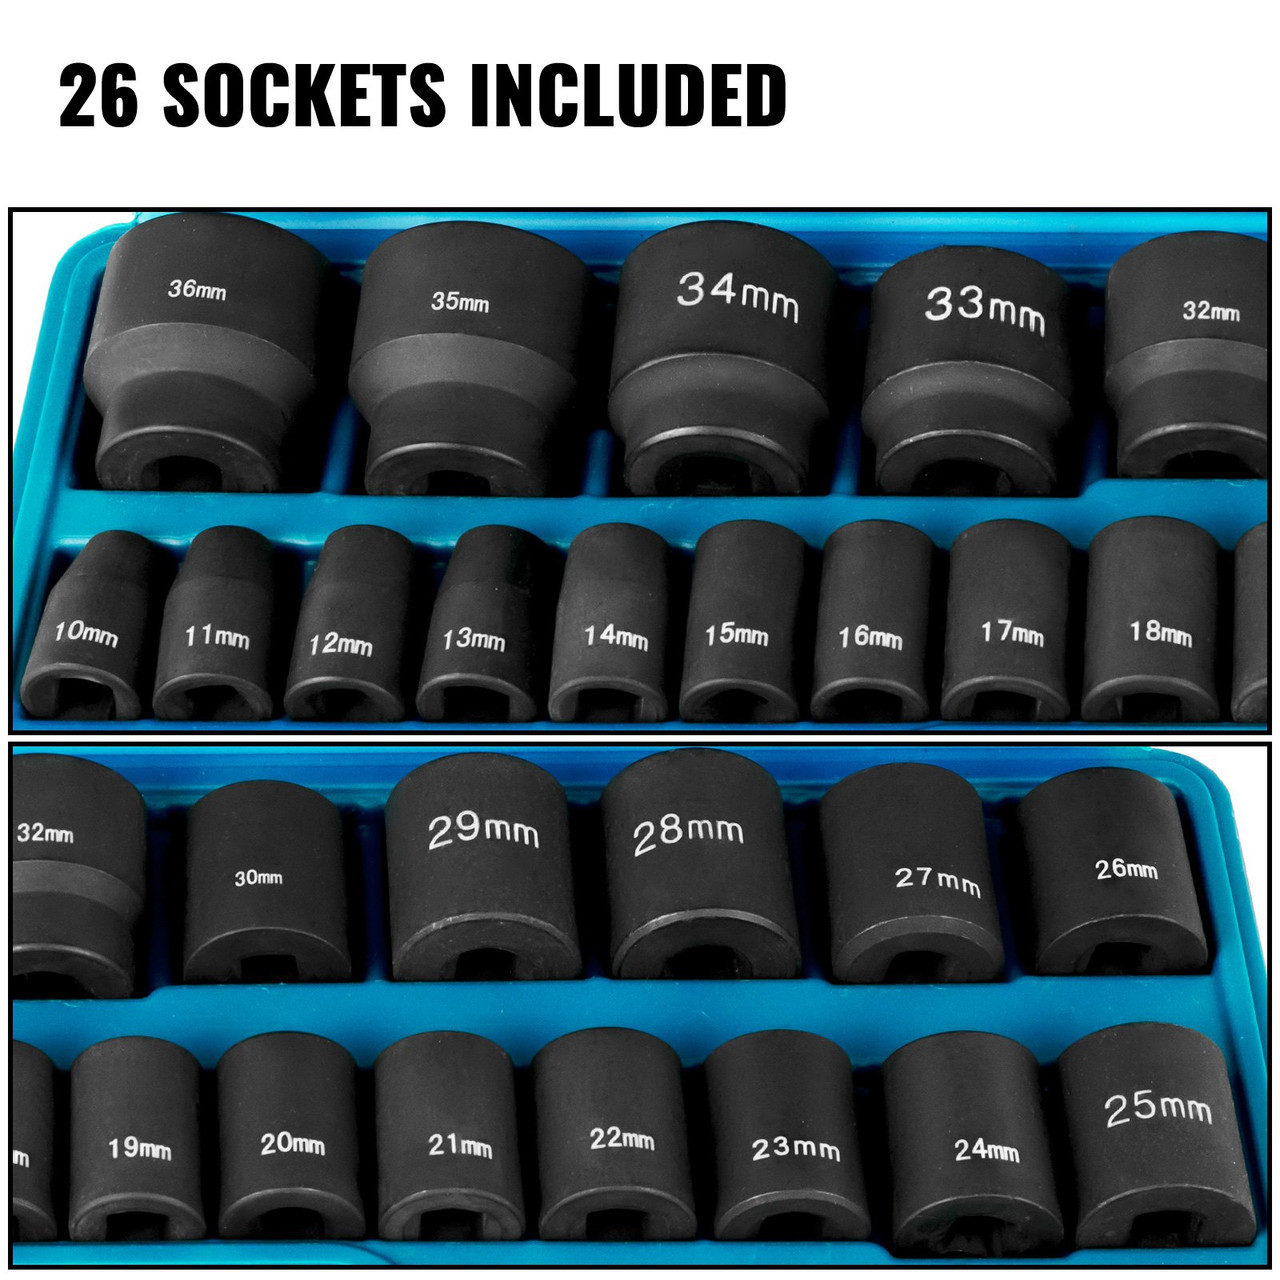 Impact Socket Set 1/2 Inches 26 Piece Impact Sockets, Shallow Socket, 6-Point Sockets, Rugged Construction, CR-M0, 1/2 Inches Drive Socket Set Impact Metric 10mm - 36mm, with a Storage Cage